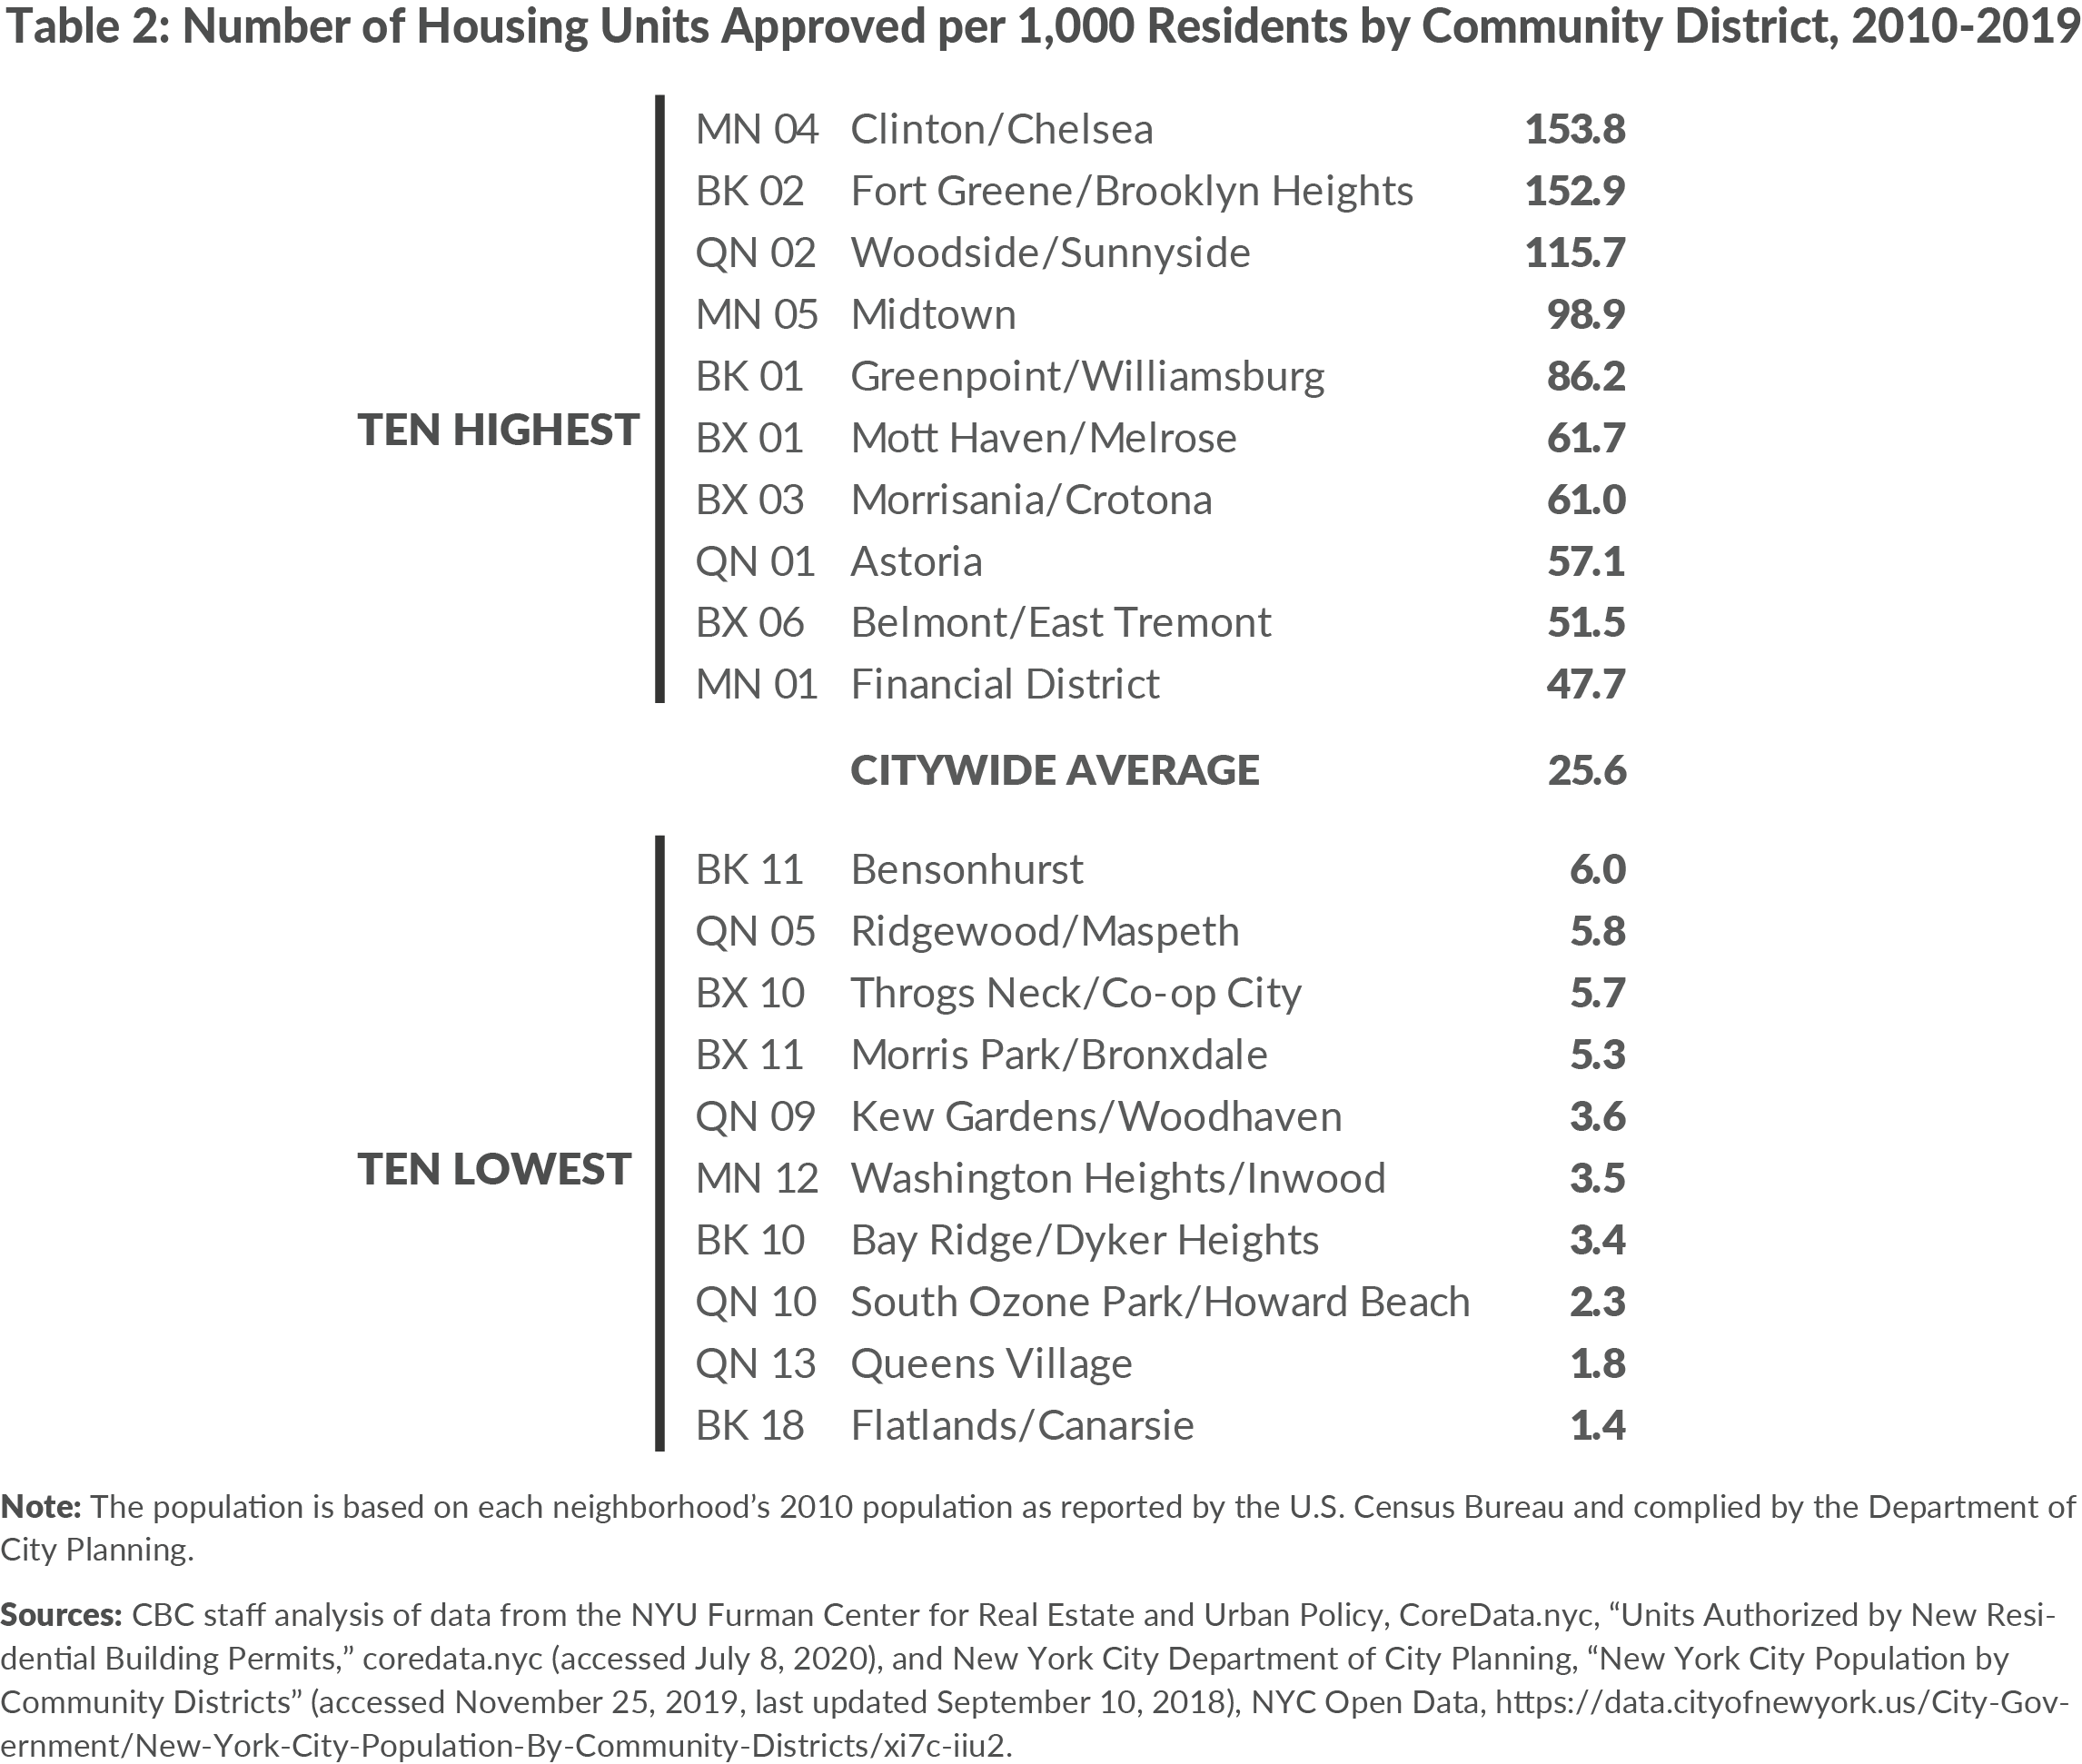 Table 2. Number of Housing Units Approved per 1,000 Residents by New York City Community District, 2010-2019